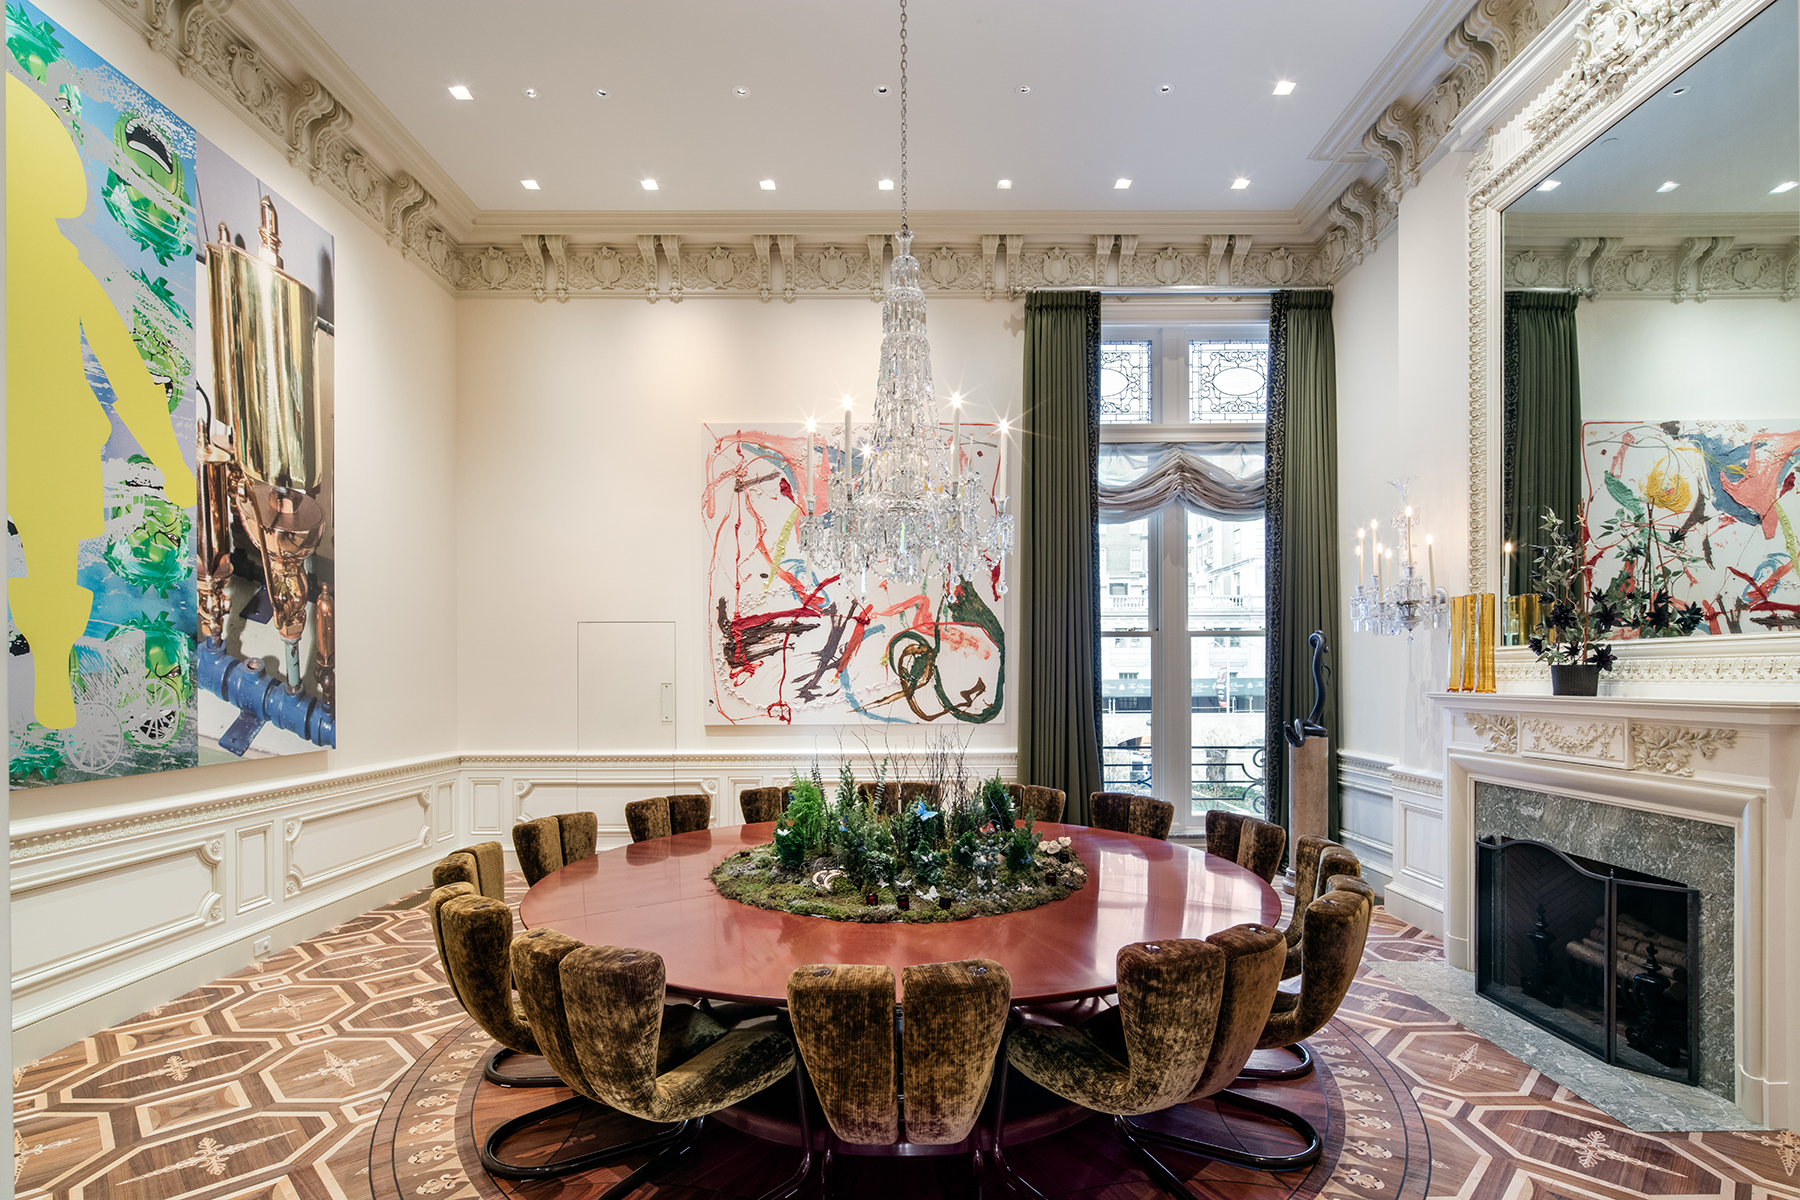 PHOTO: This six-floor limestone mansion, boasting about 15,000 square feet and a prime Manhattan location, is on the market for $84.5 million.